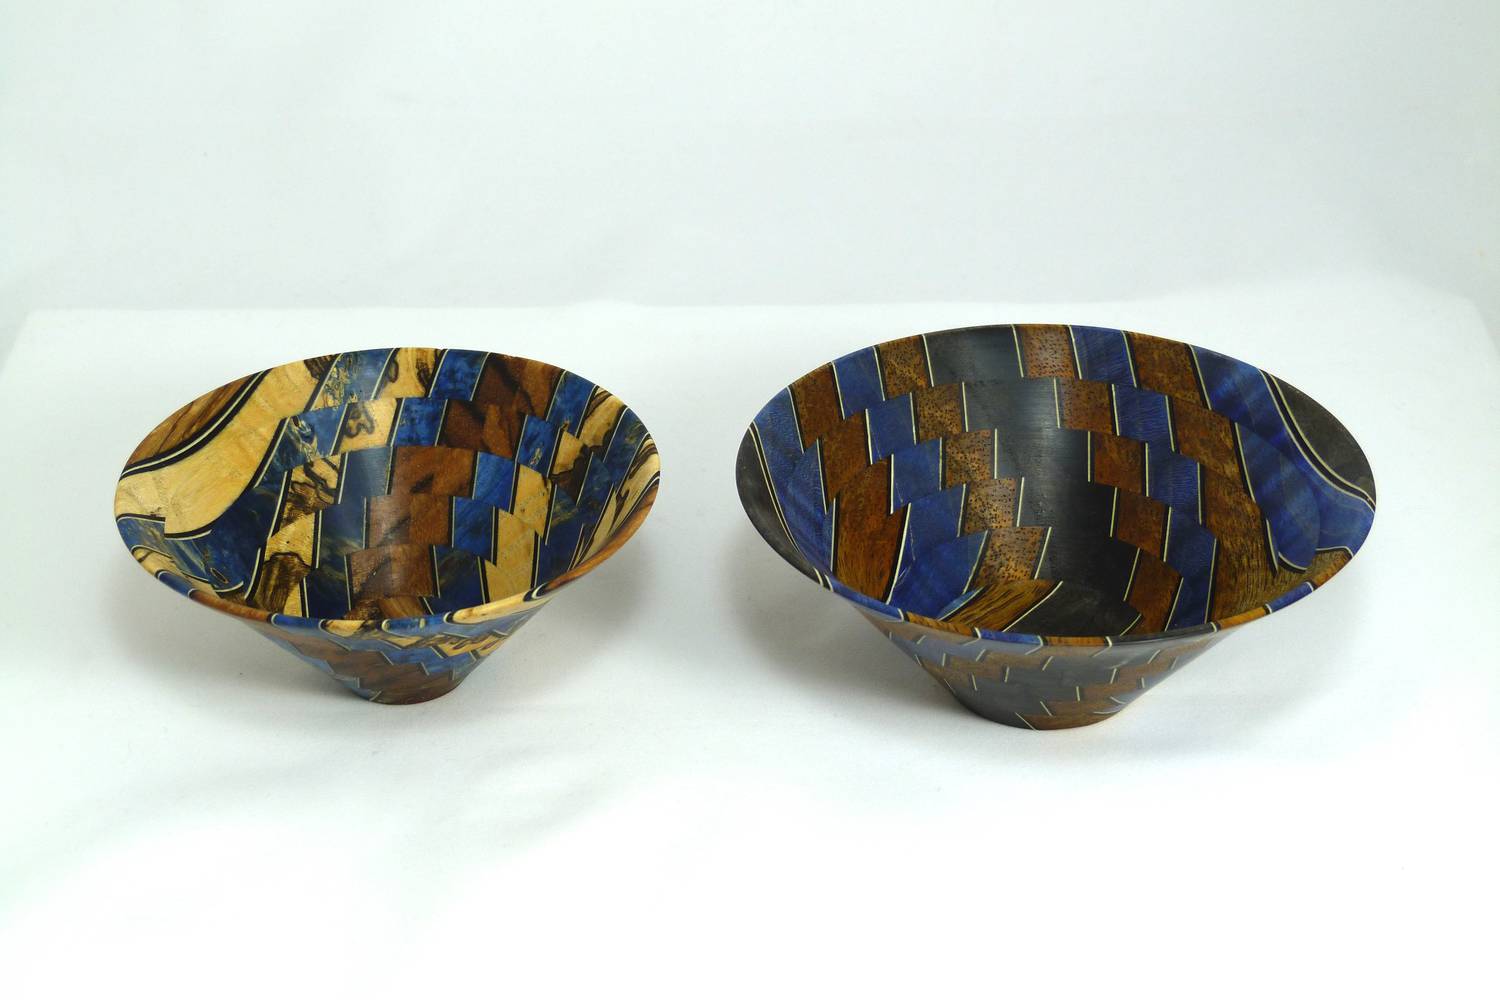 Two bowls from stabilized pan blanks